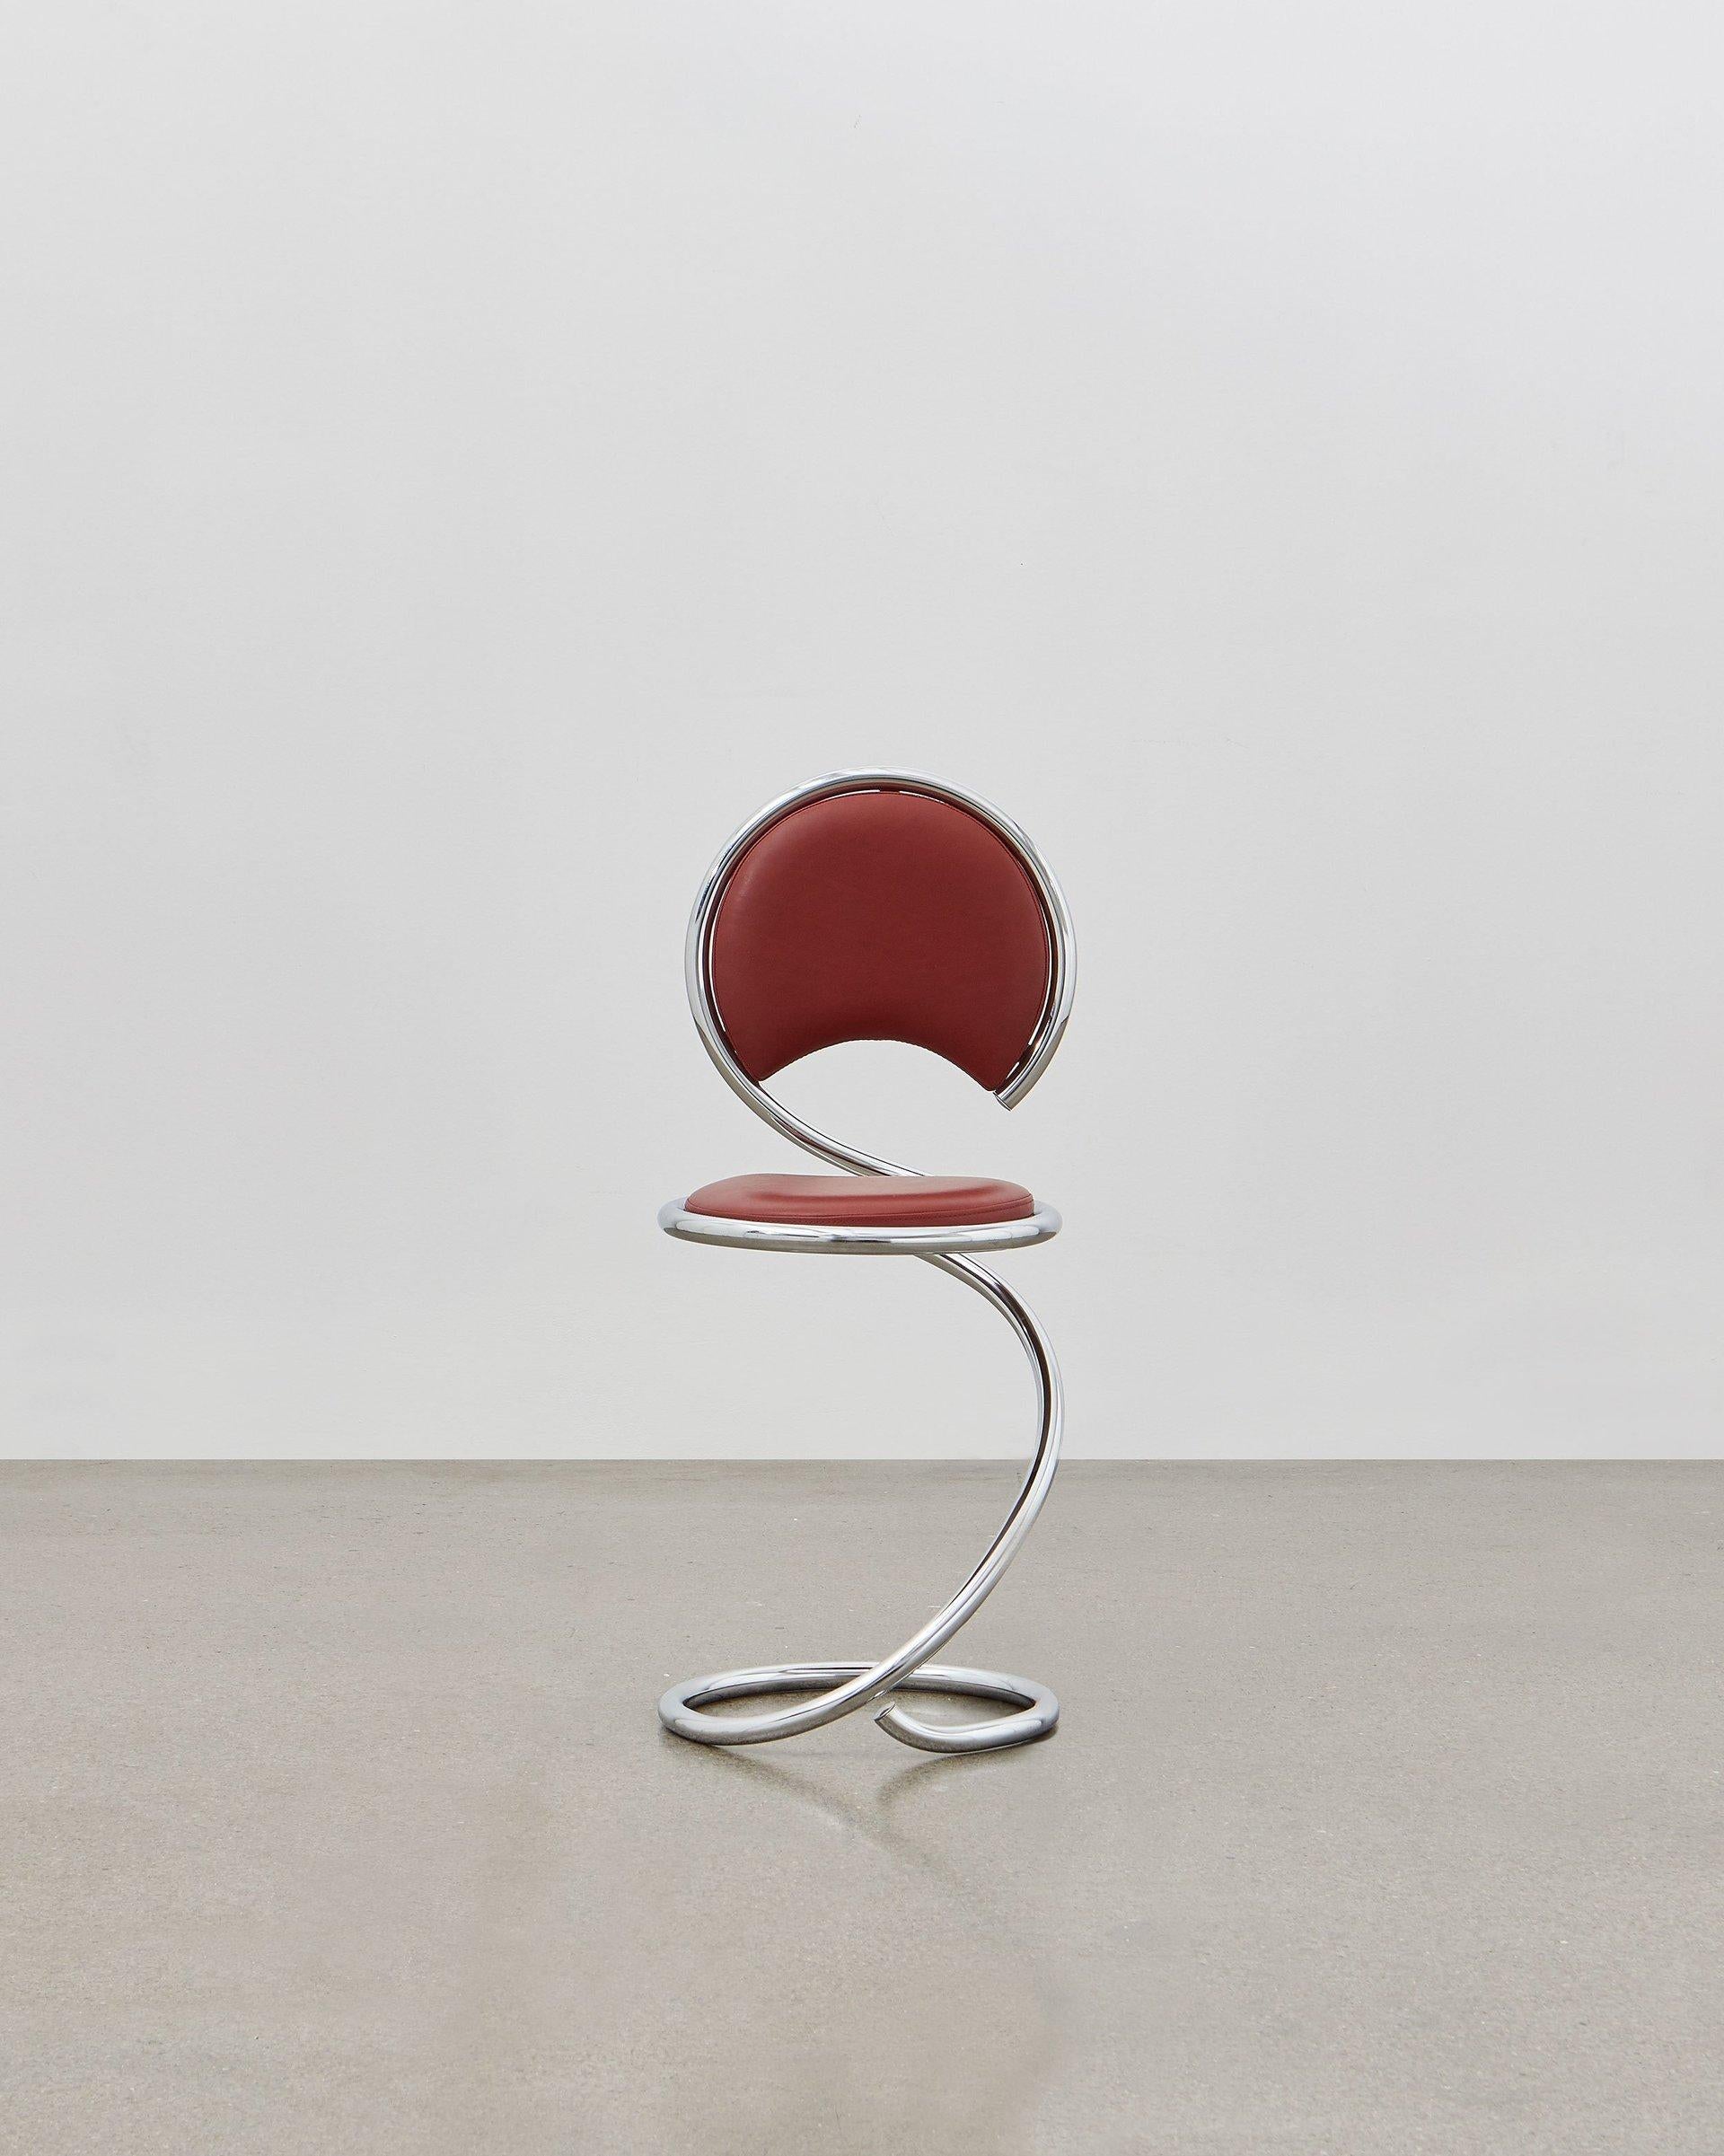 The PH snake chairs flowing lines within its steel tube design are inspired by the strong yet flexible body of a snake. It is multi-use and fits any room at home, in the apartment, in the office, with a function or simply as a piece of art to be